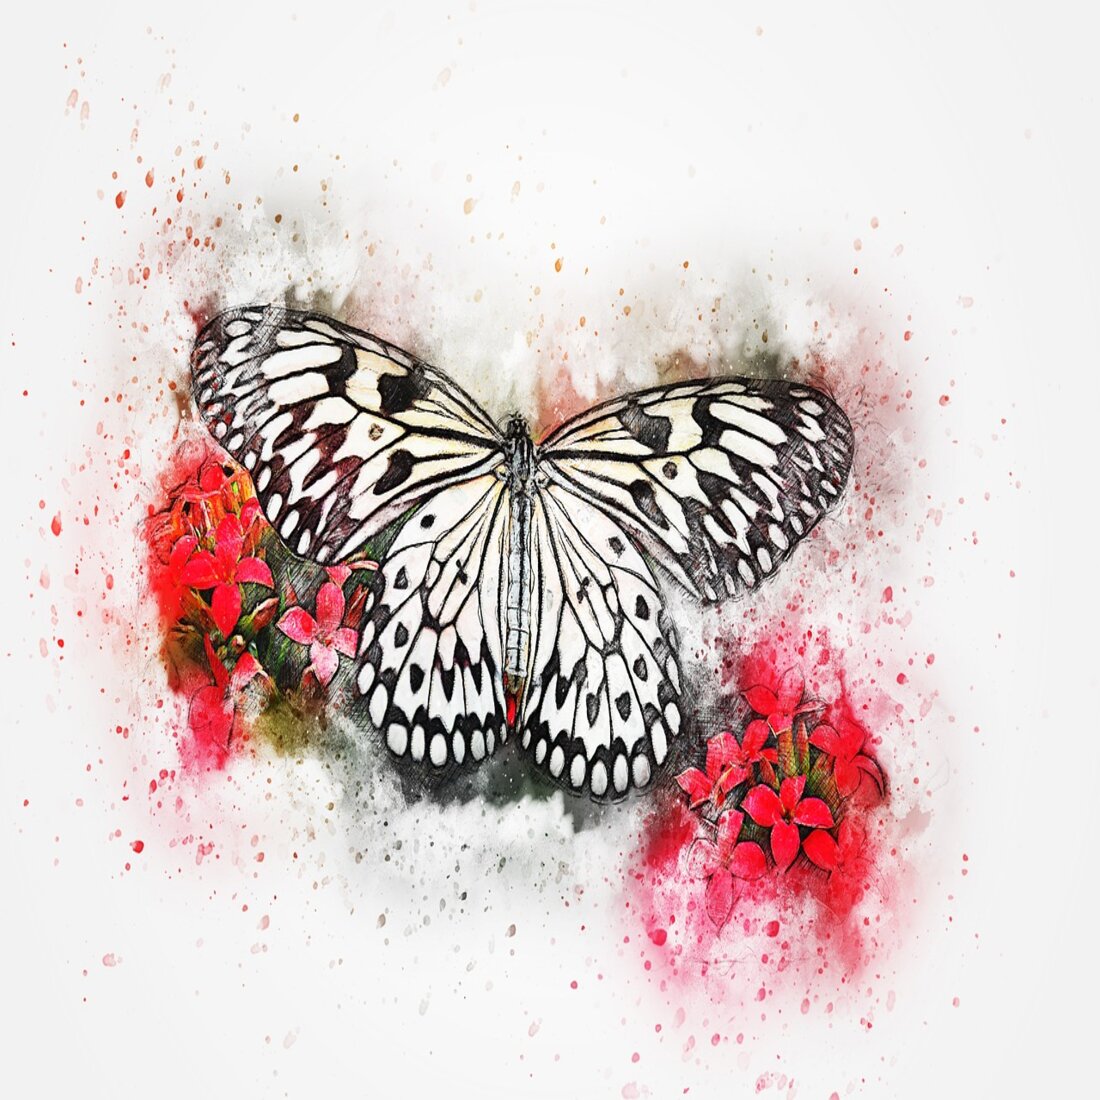 Butterfly preview image.